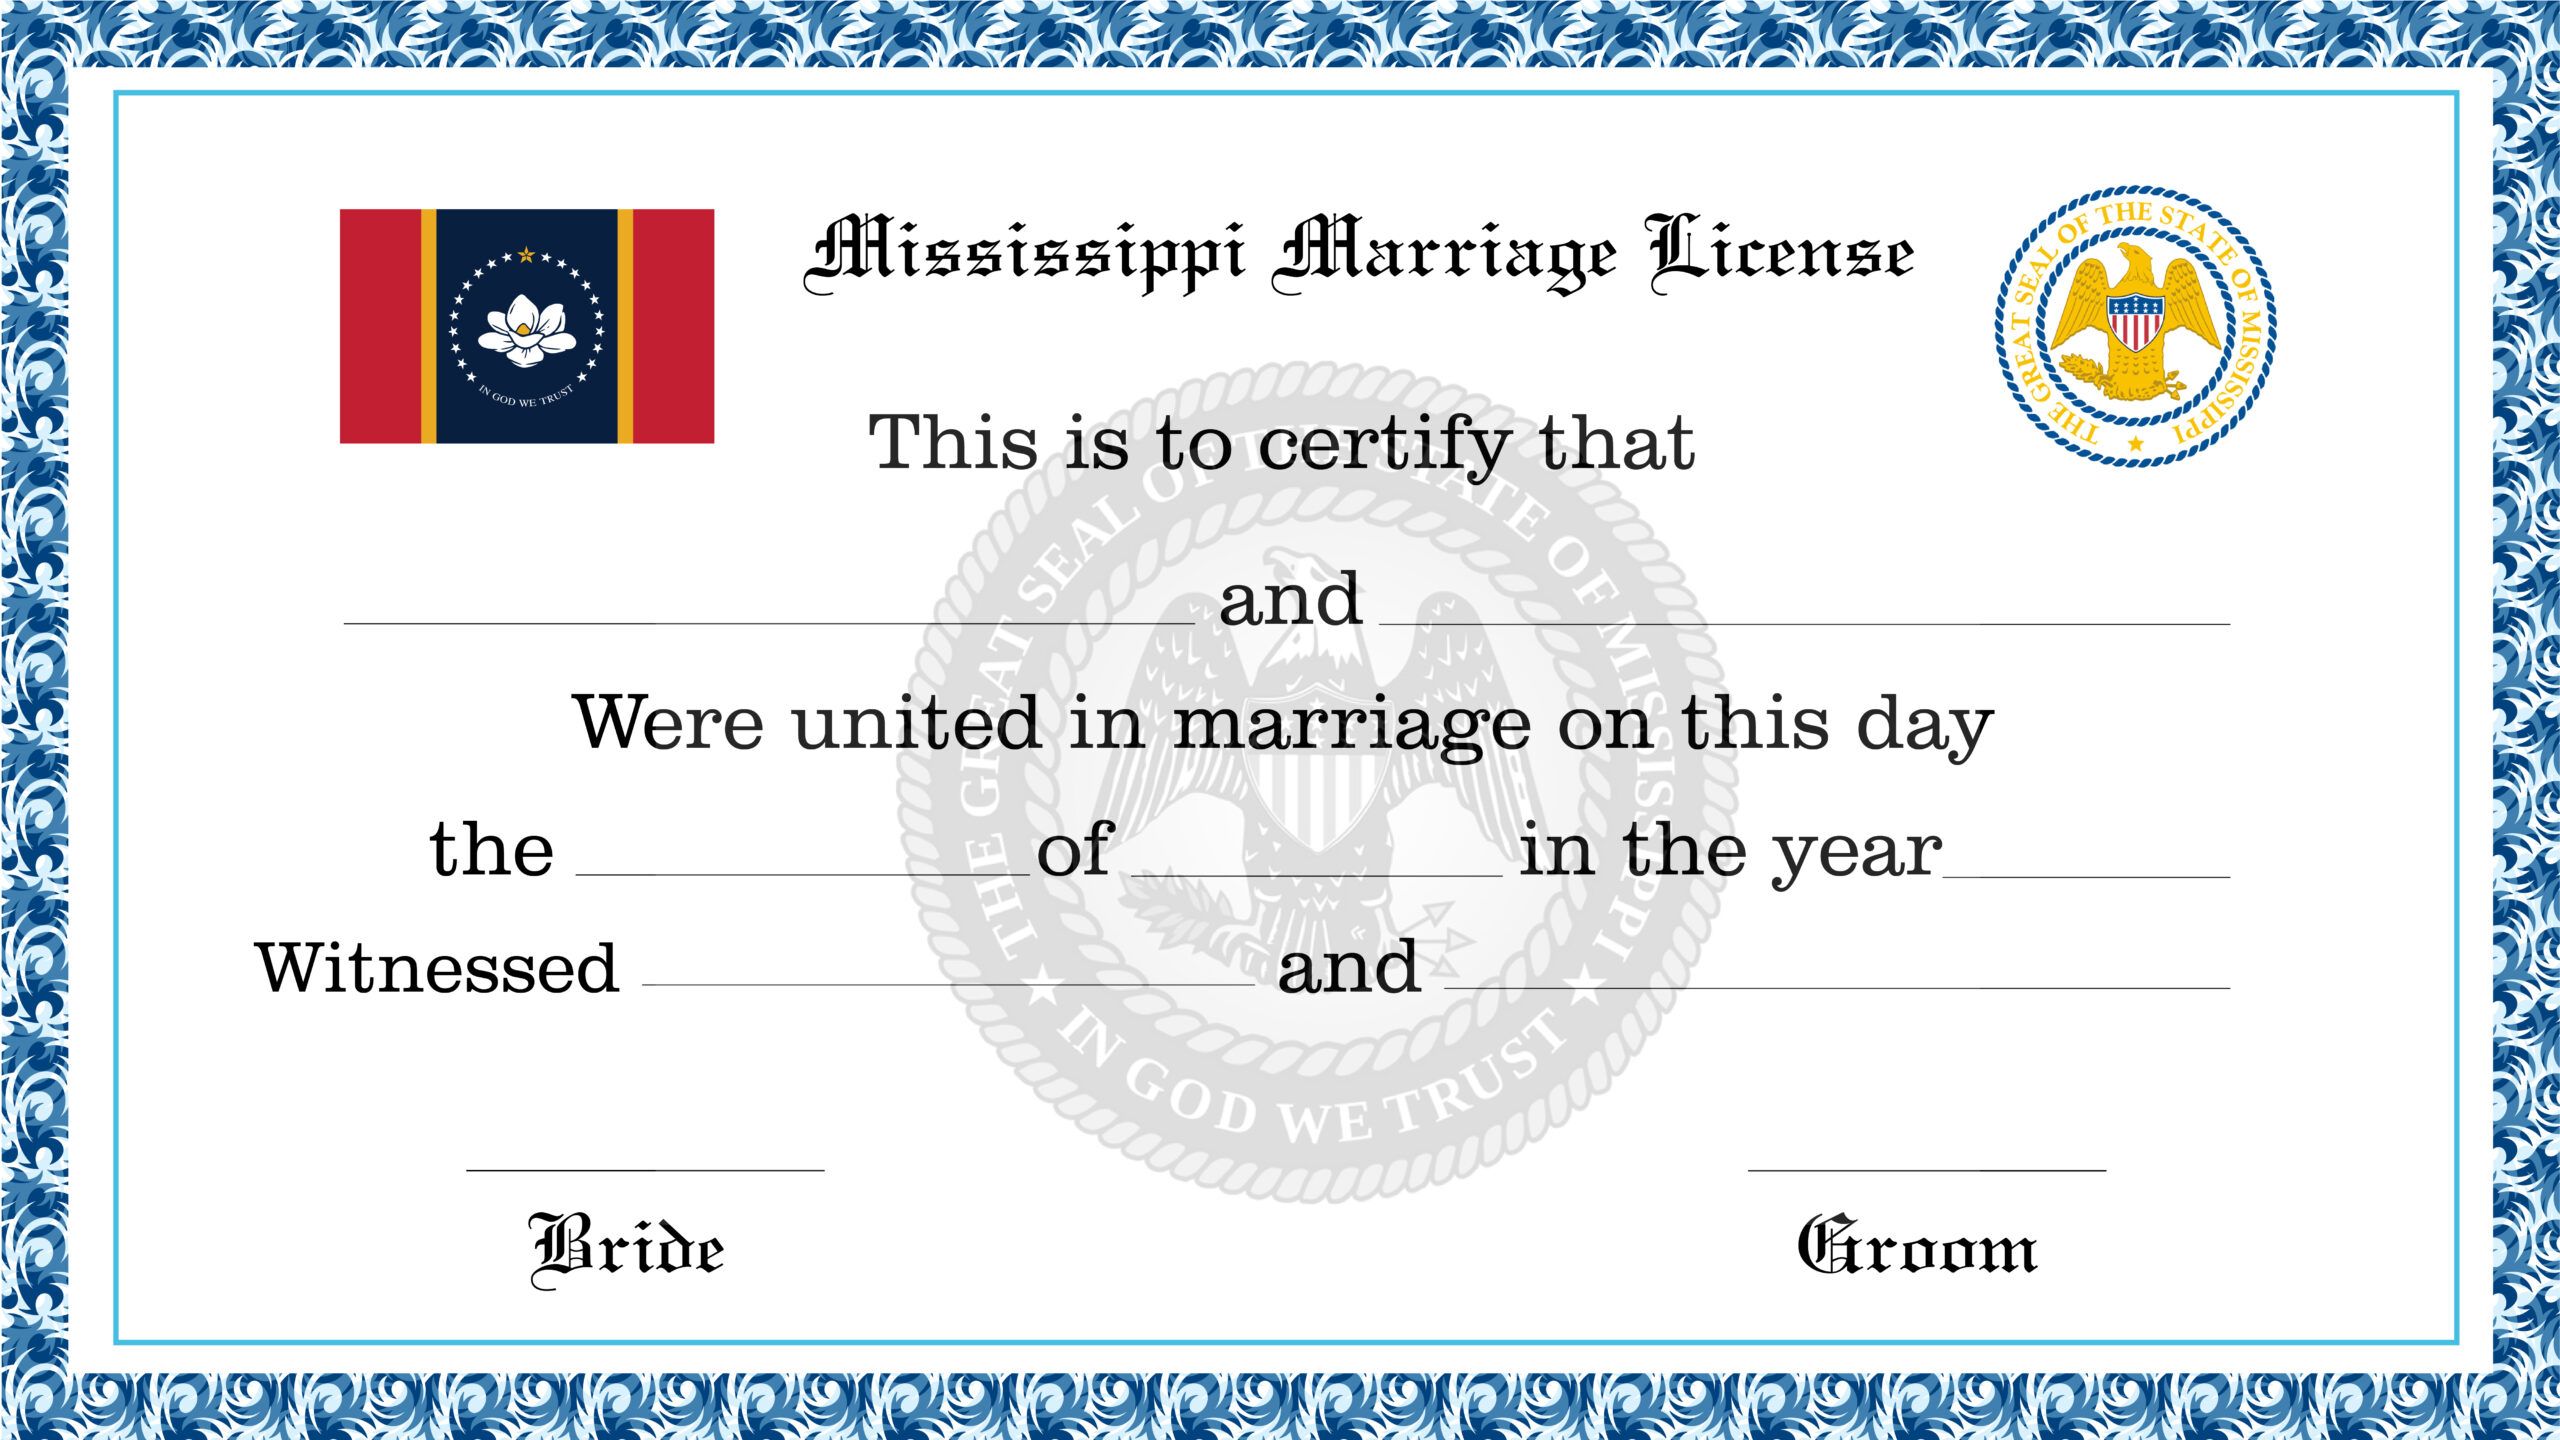 Mississippi Marriage License License Lookup